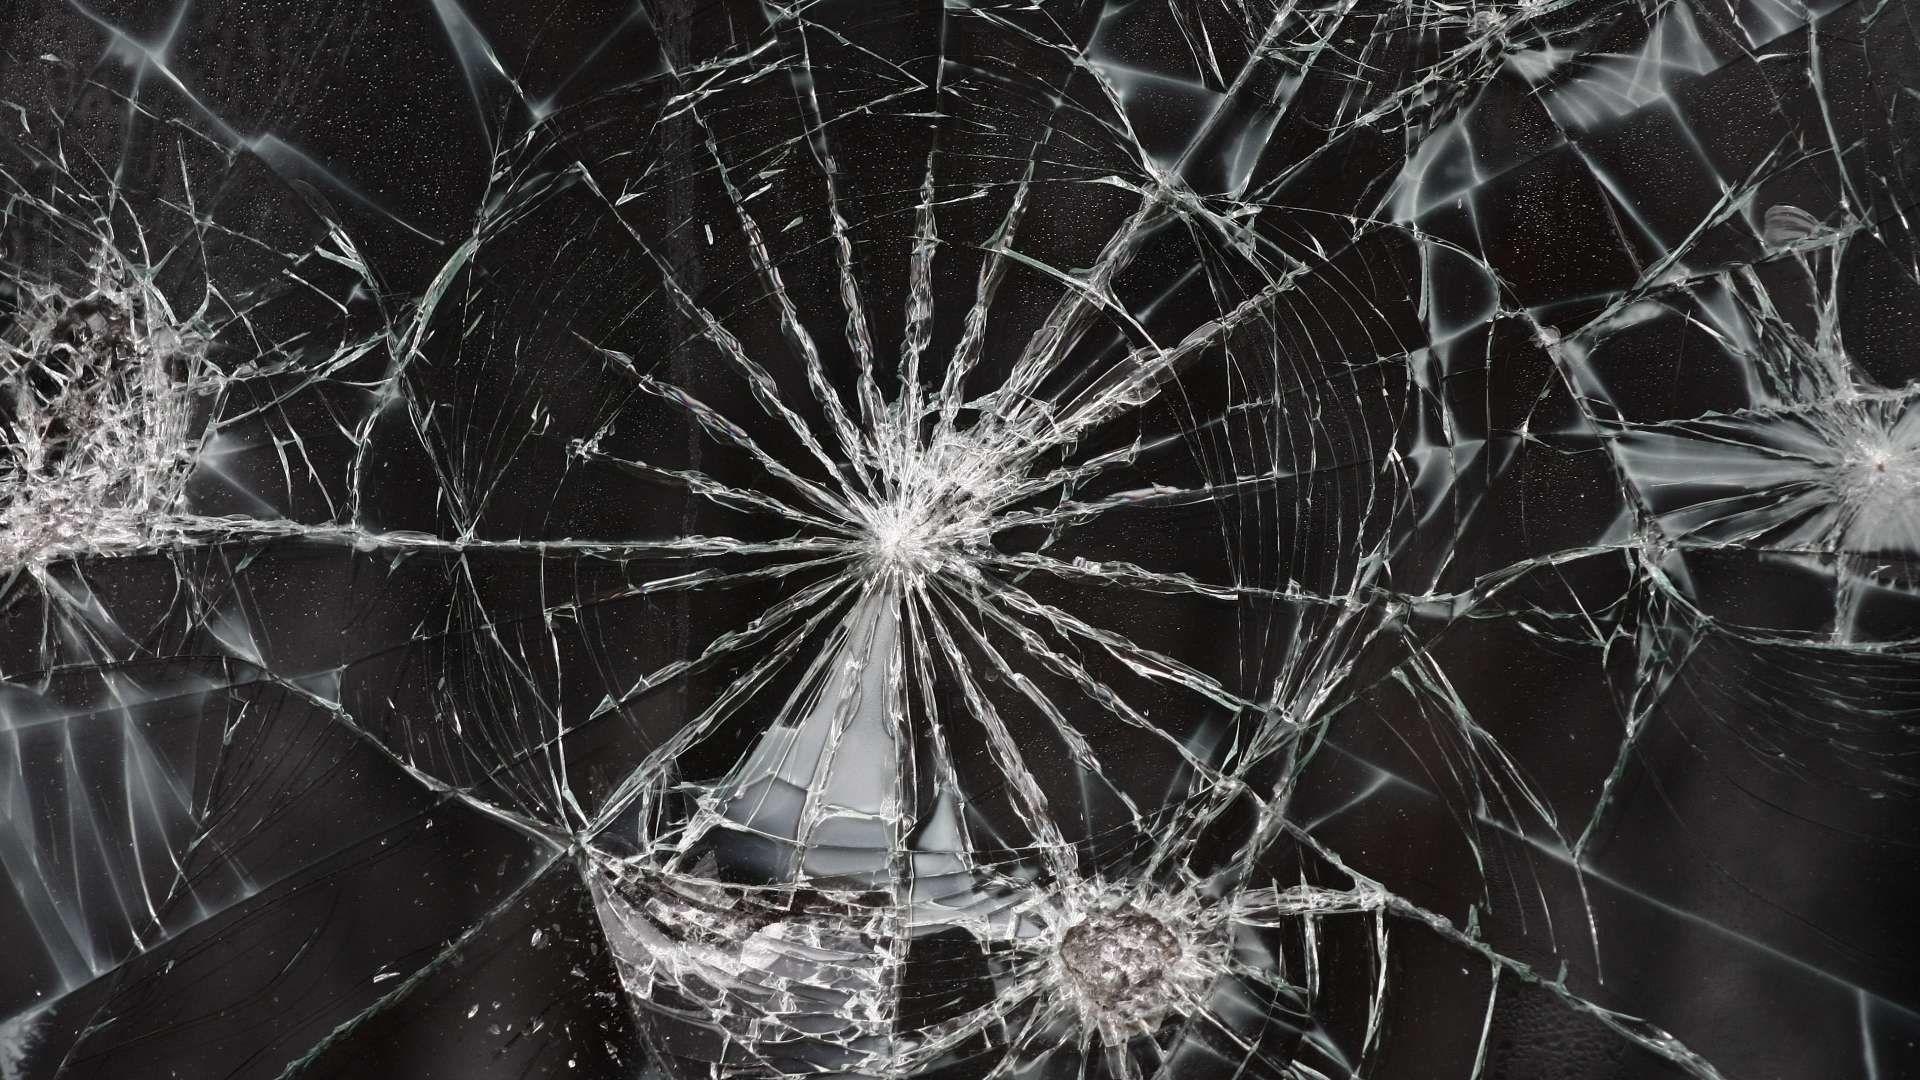 Cracked Screen Wallpaper Free Cracked Screen